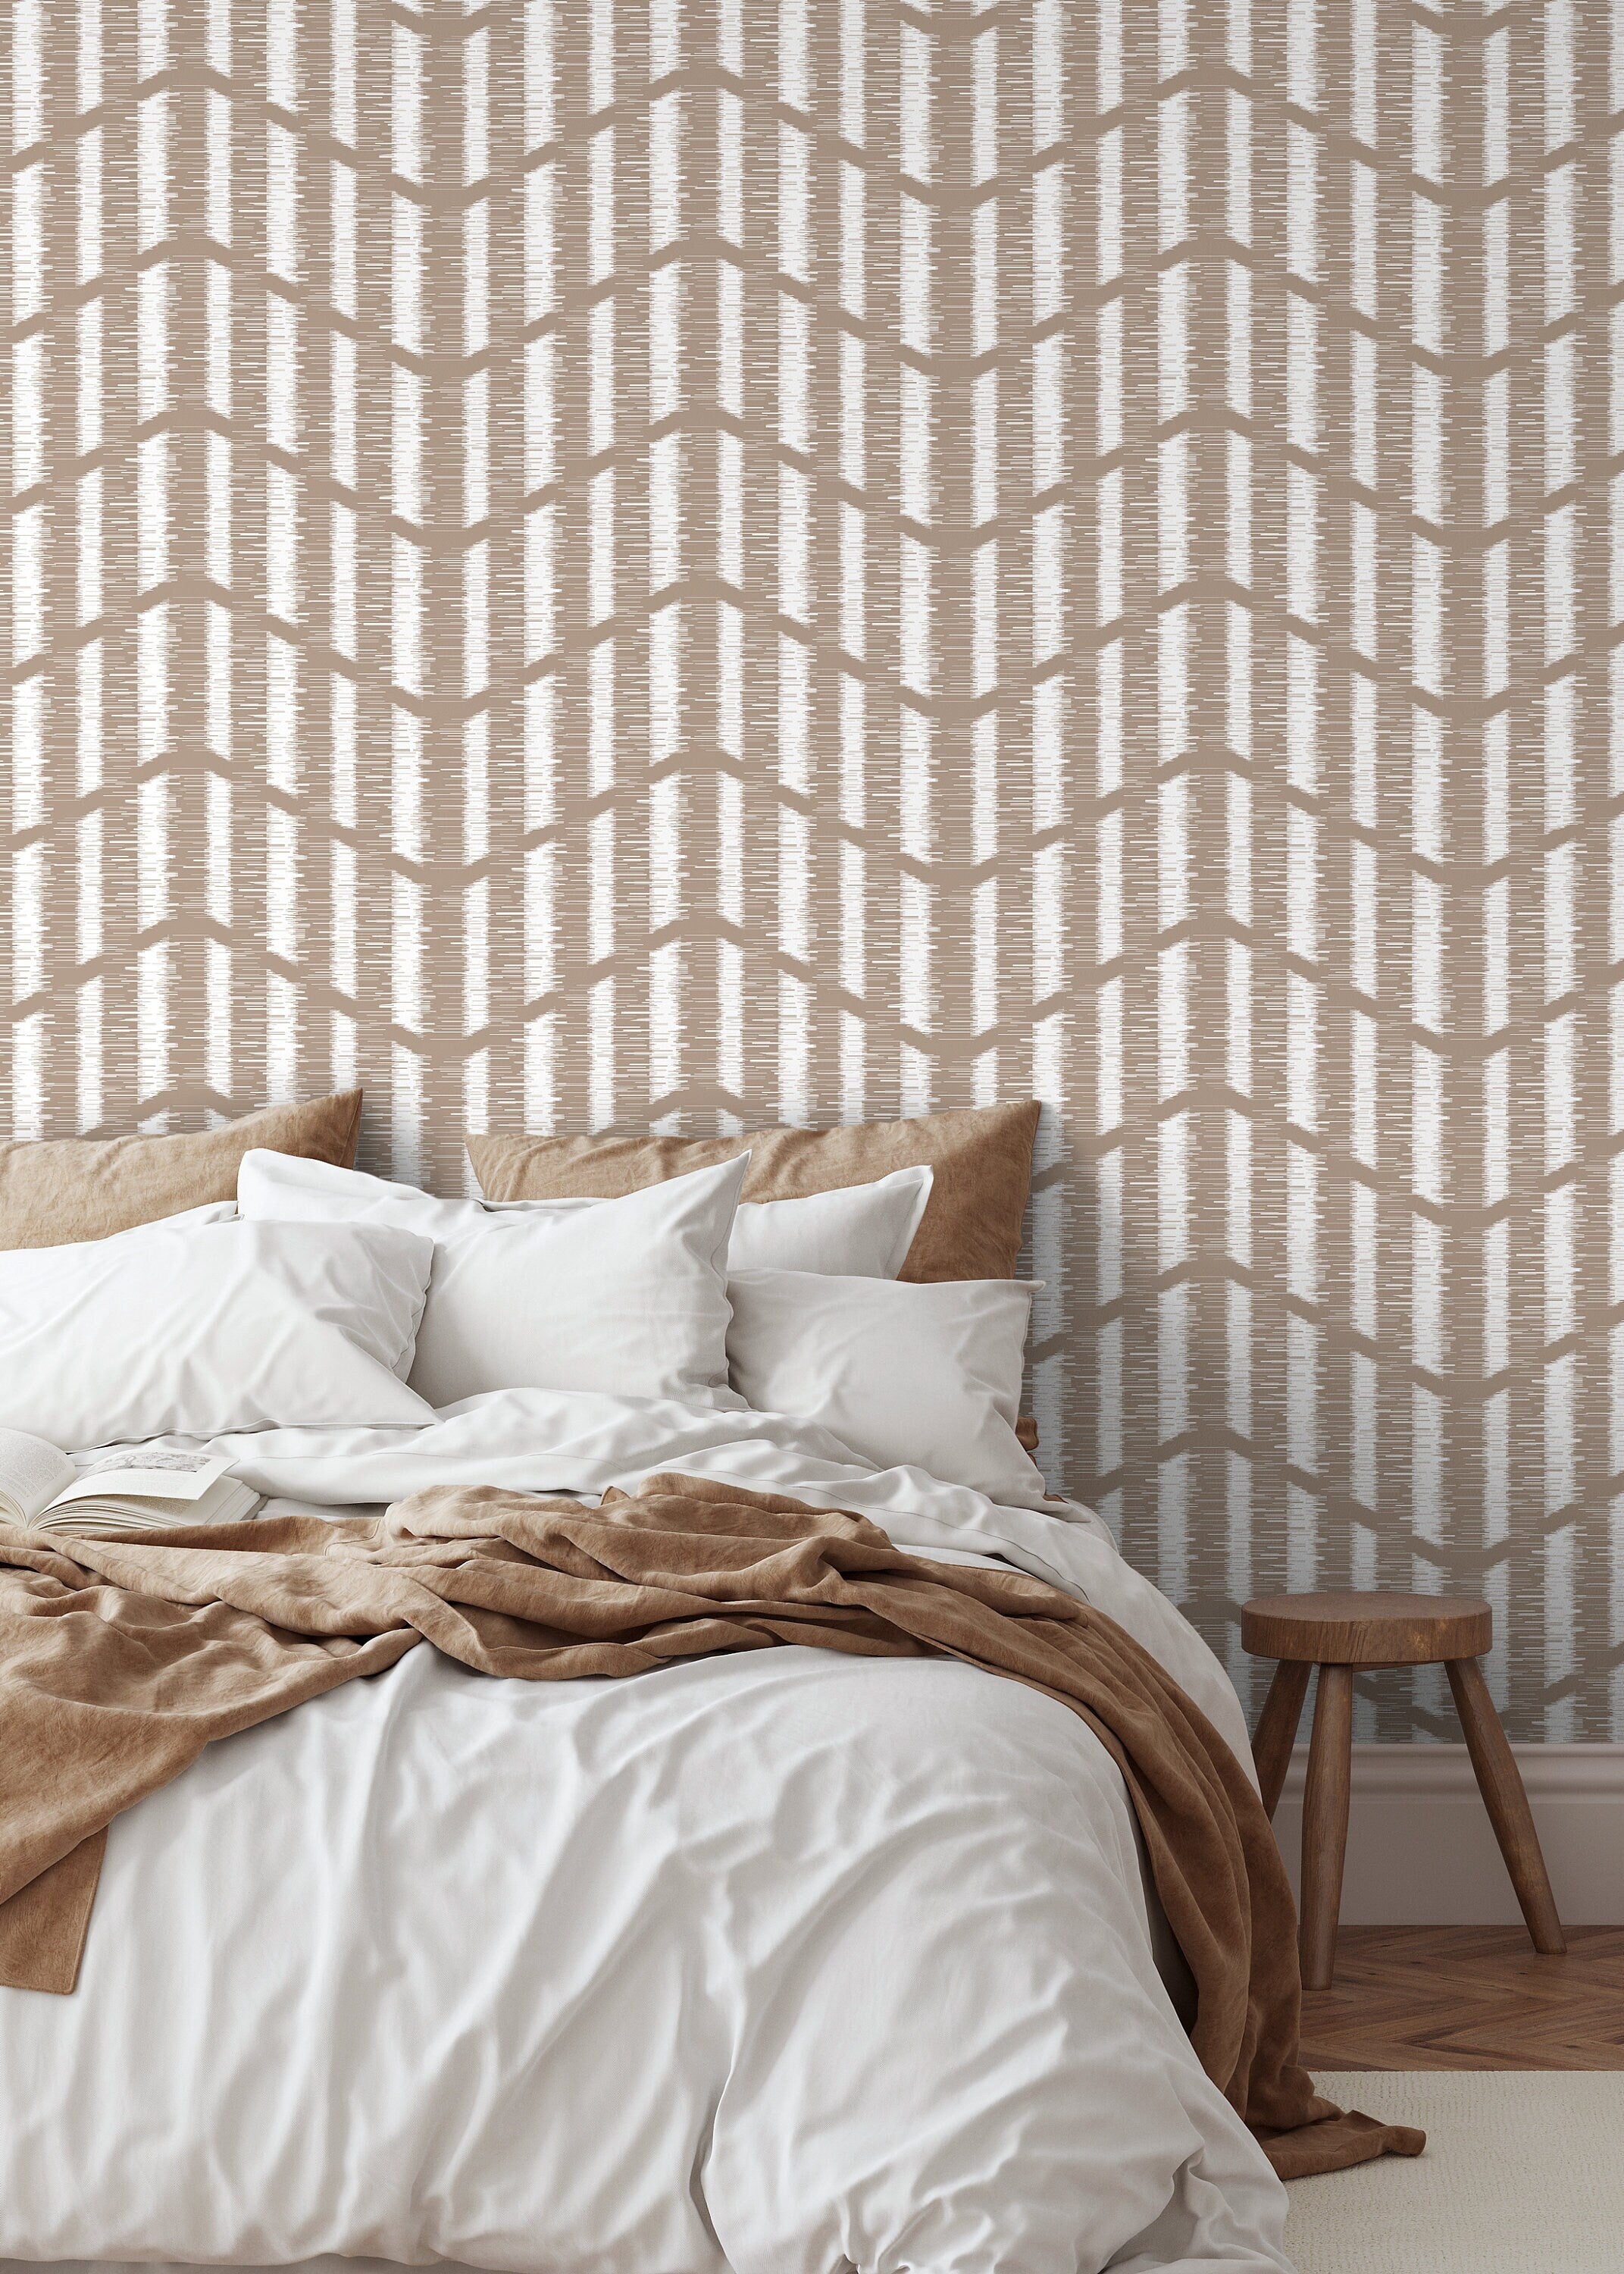 Boho Peel And Stick Removable Wallpaper  200 Colors